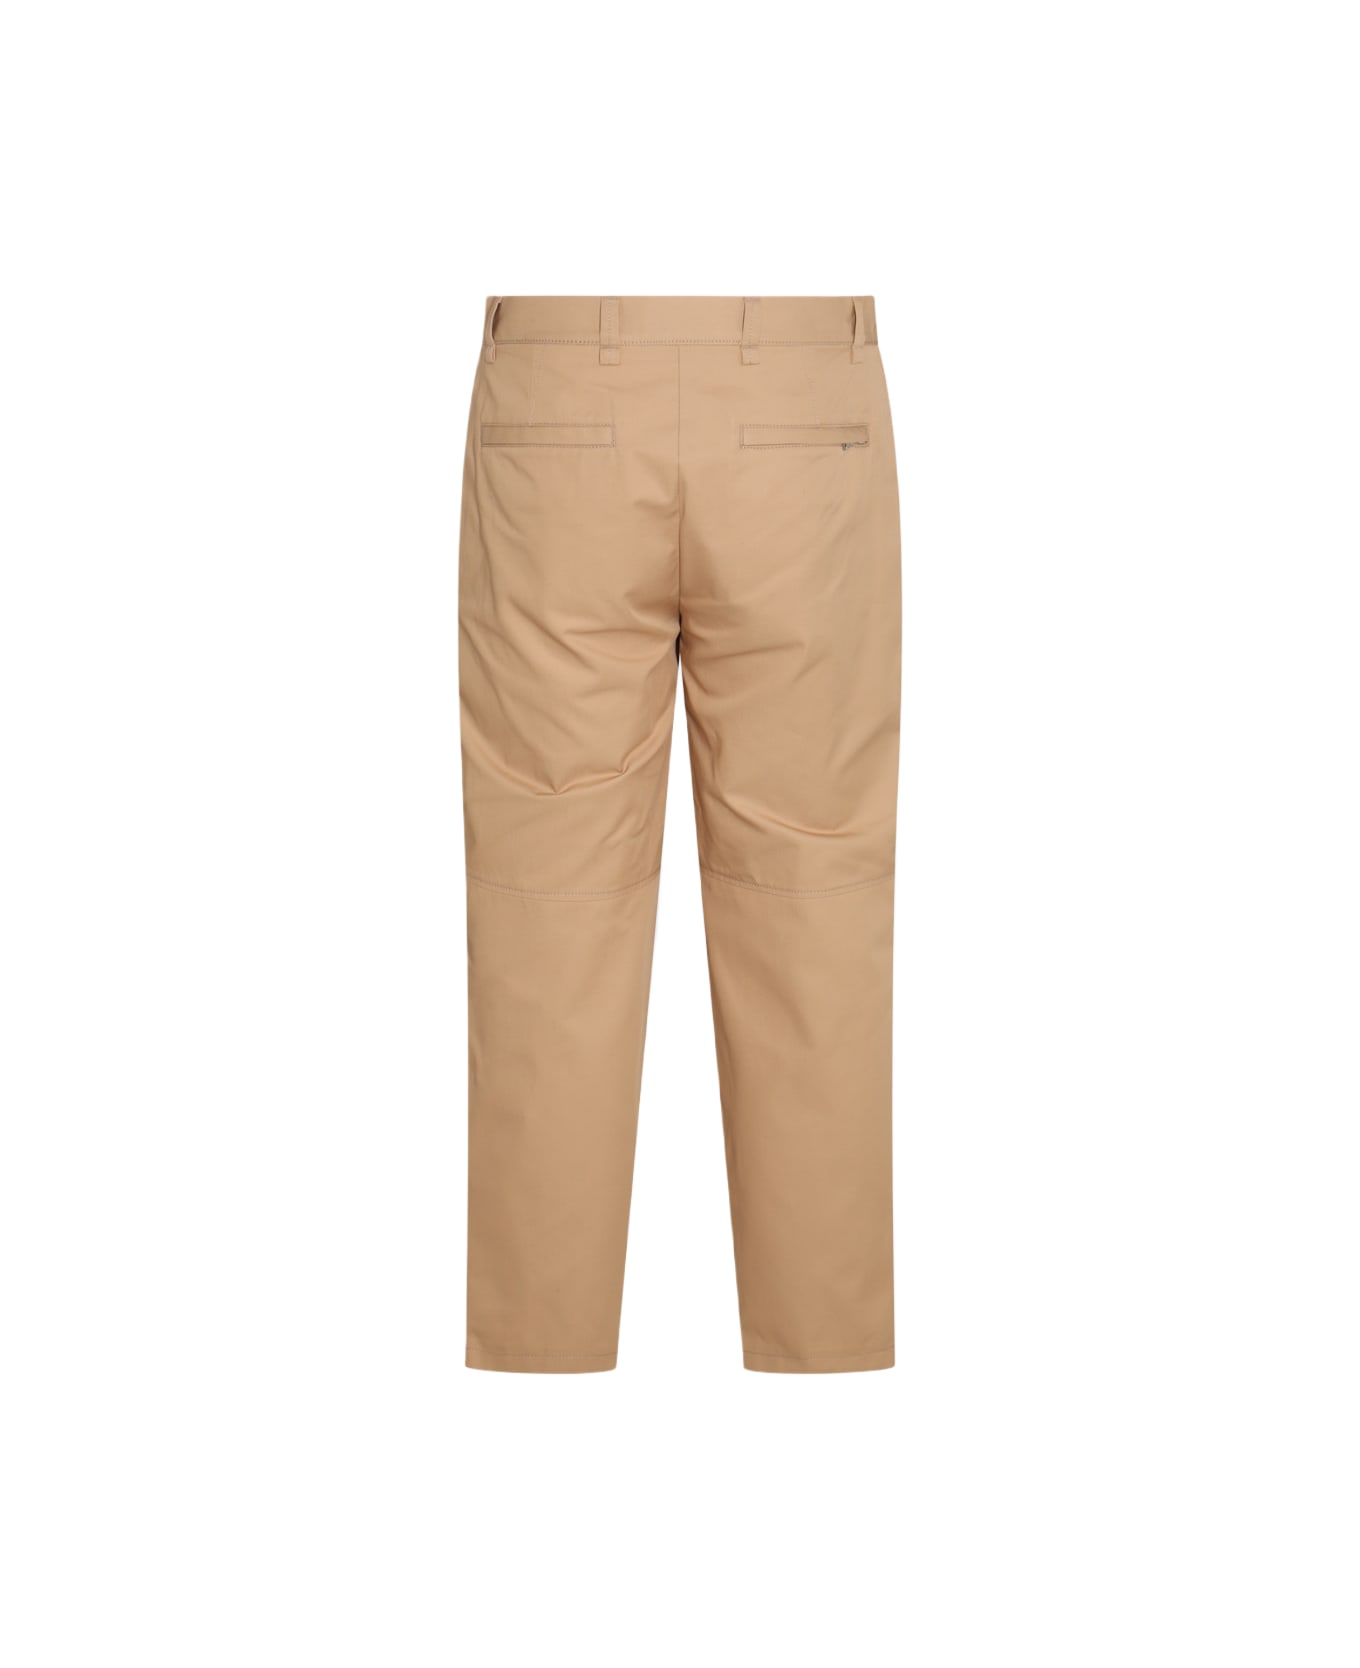 Lanvin Sand Cotton And Wool Blend Pants - SAND ボトムス